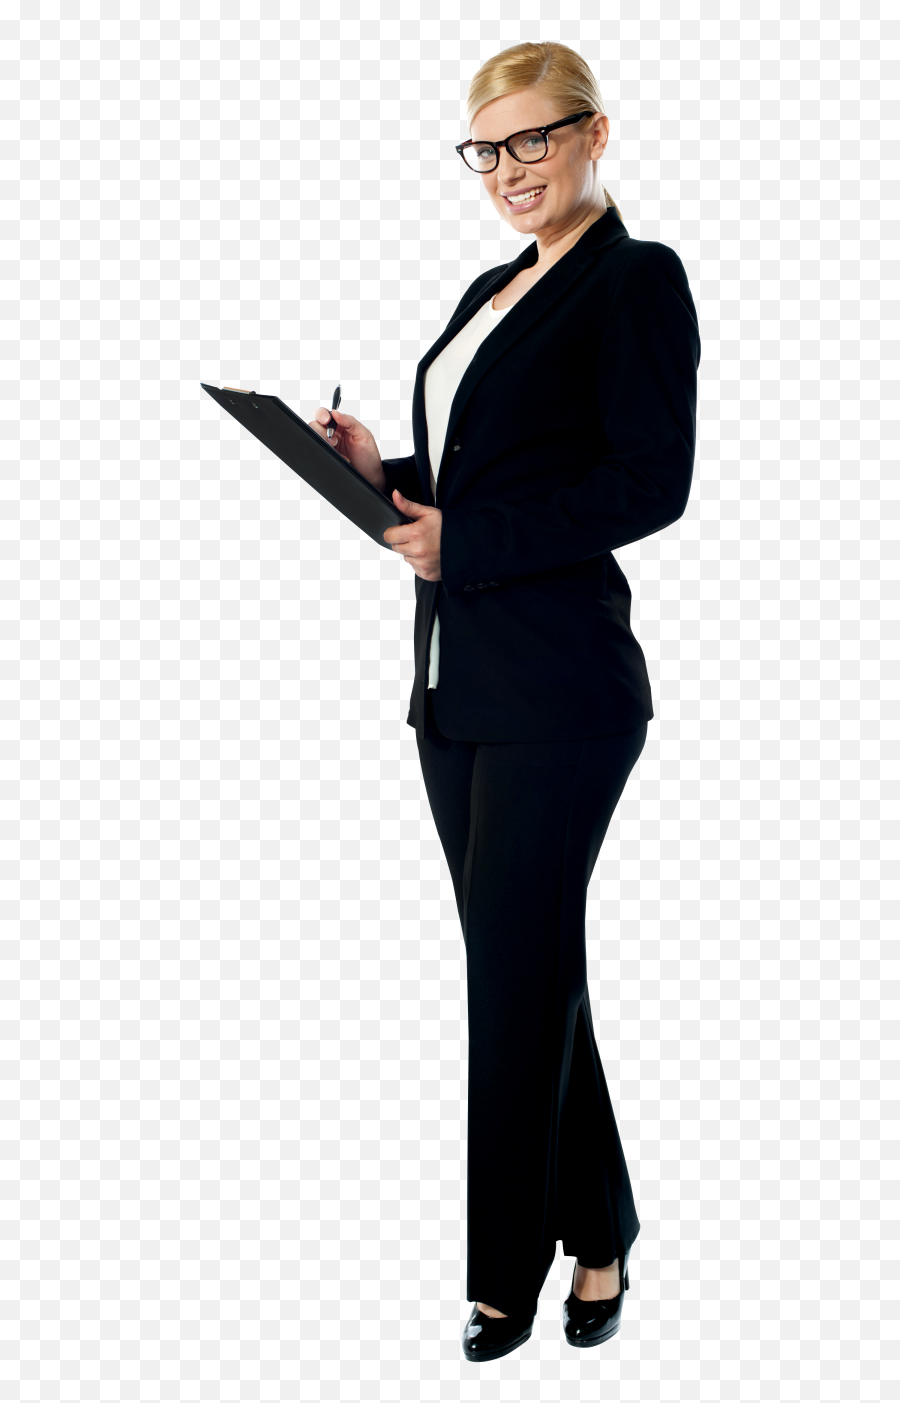 Business Women Png Image - Business Women,Business Woman Png